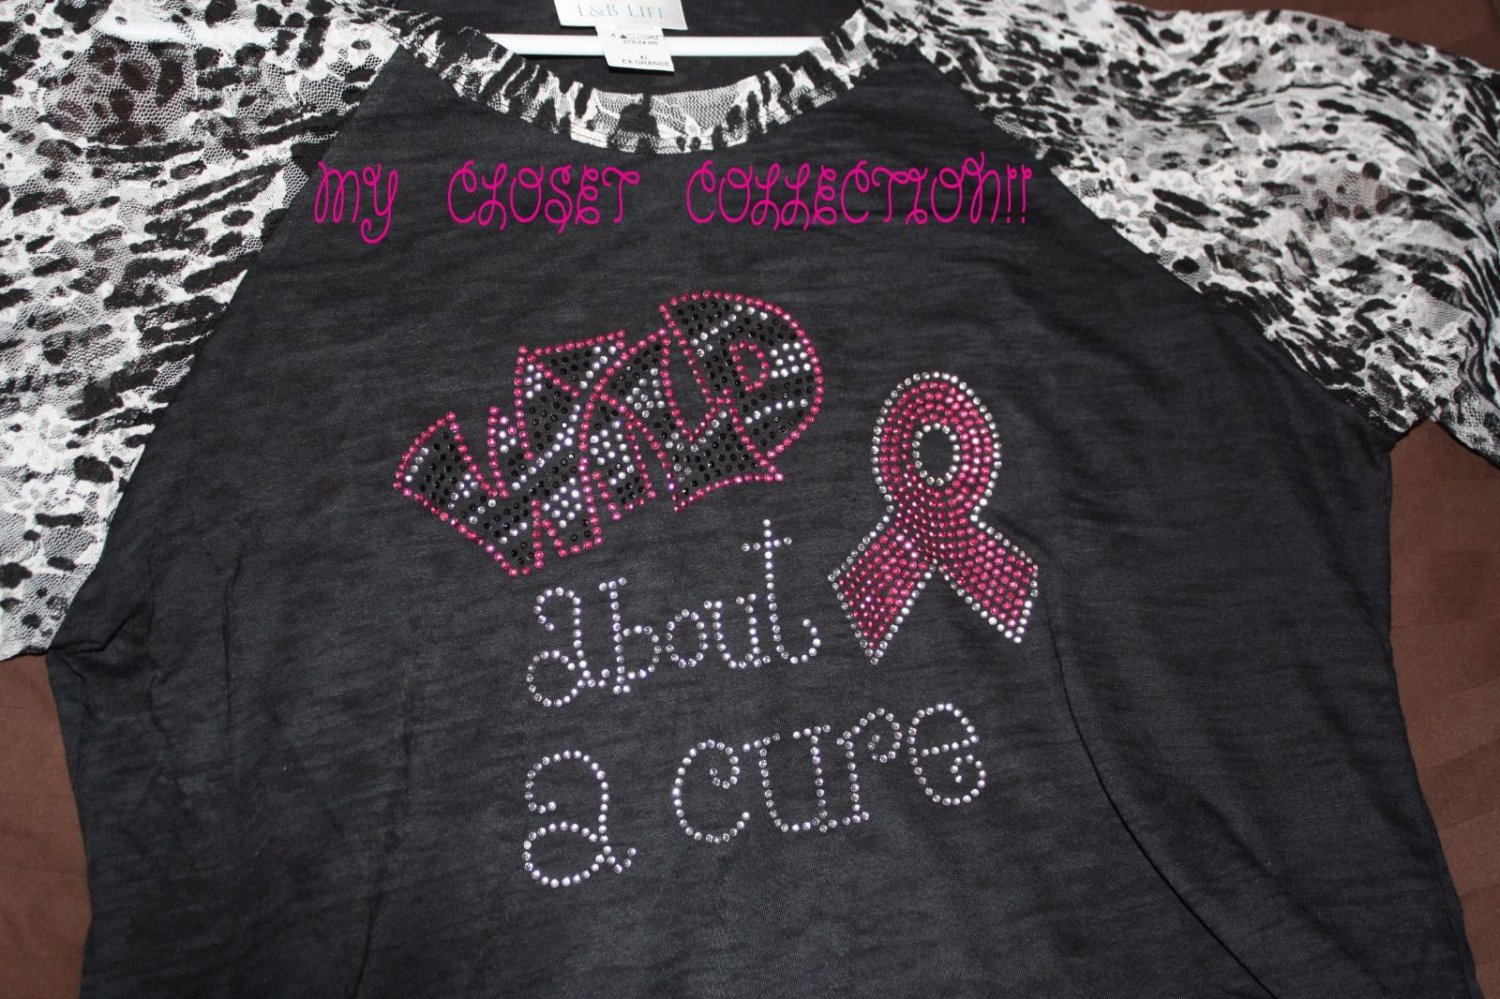 Bling Rhinestone Embellished T-shirt,New,Wild About a Cure Design ...